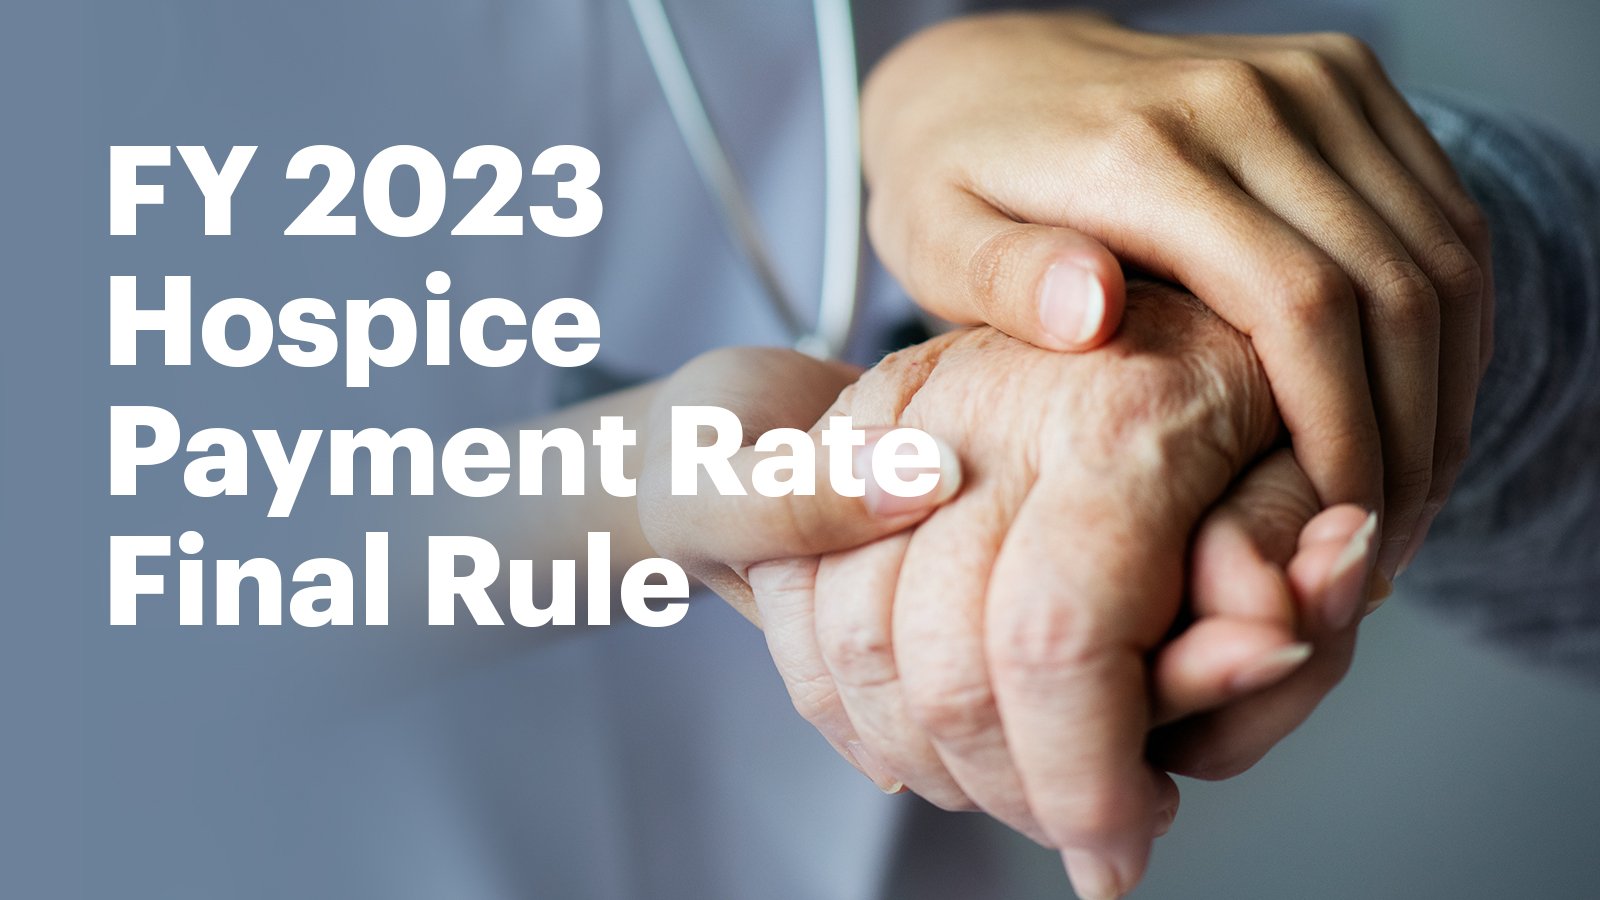 FY 2023 hospice payment rate update final rule solidifies payment